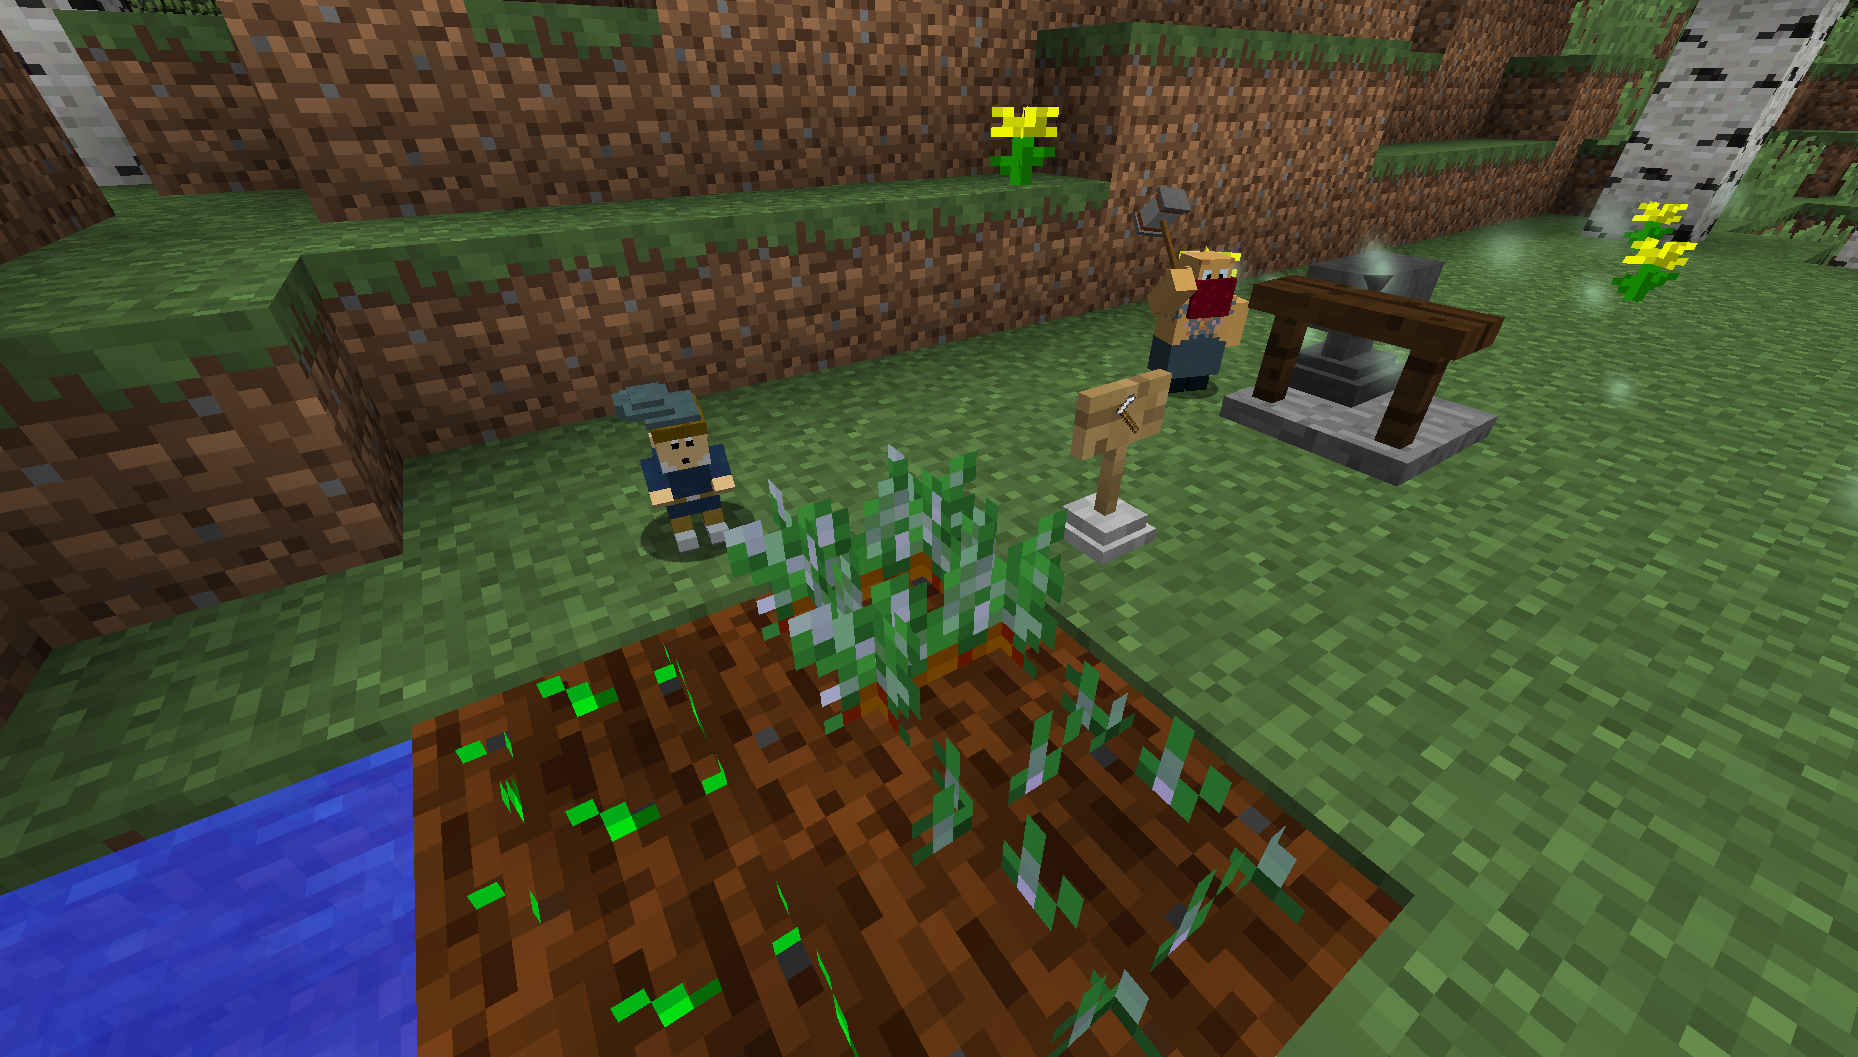 Introduces magical Fey to minecraft which provide powerful automation